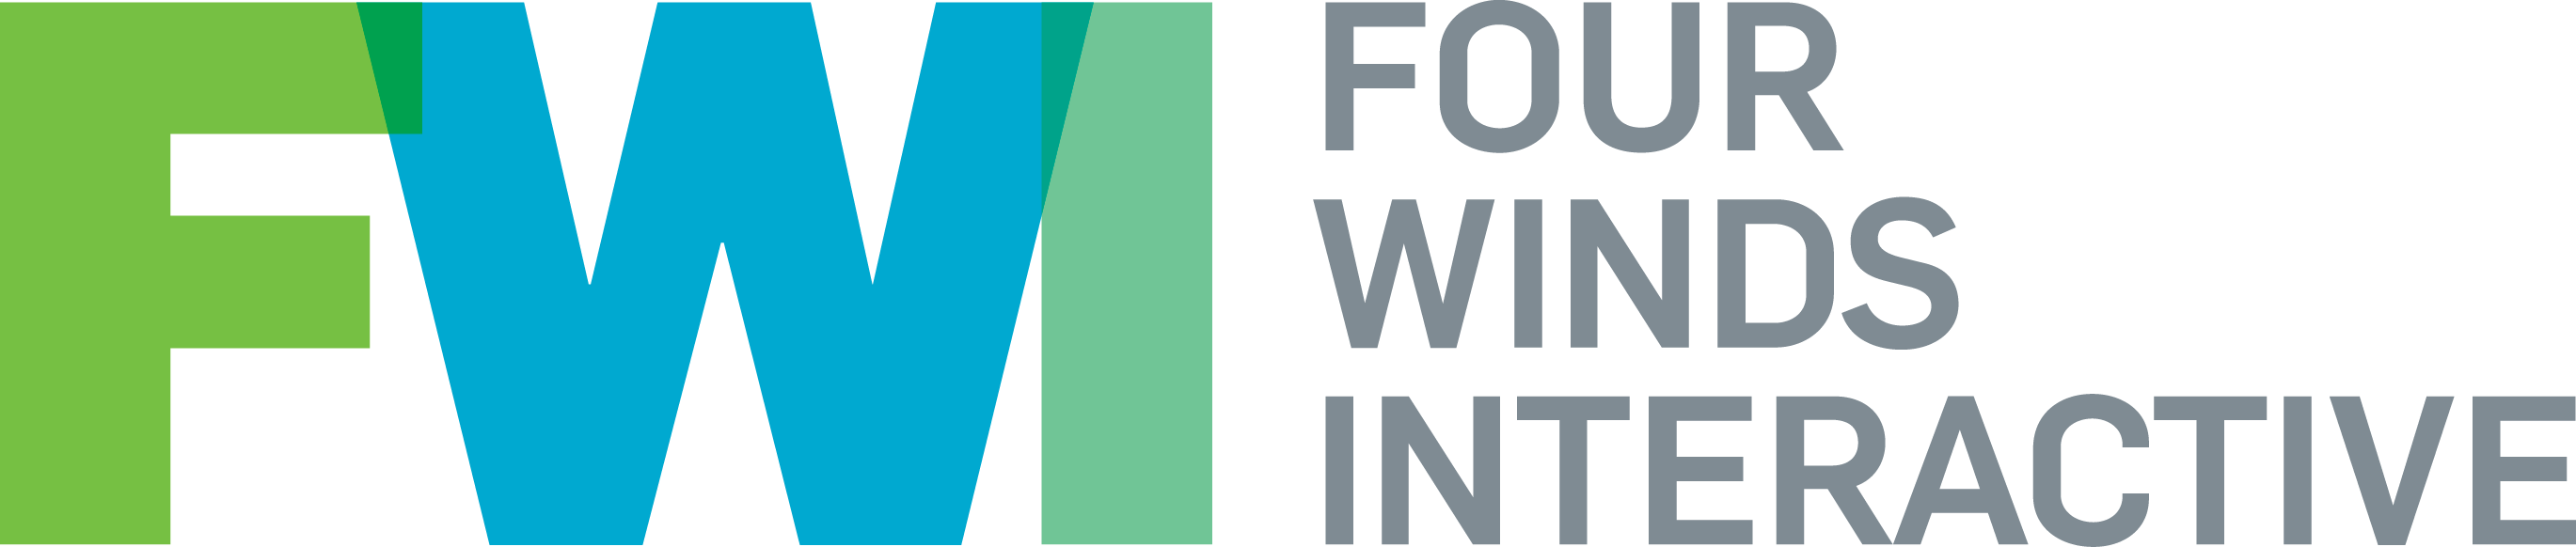 Four Winds Interactive